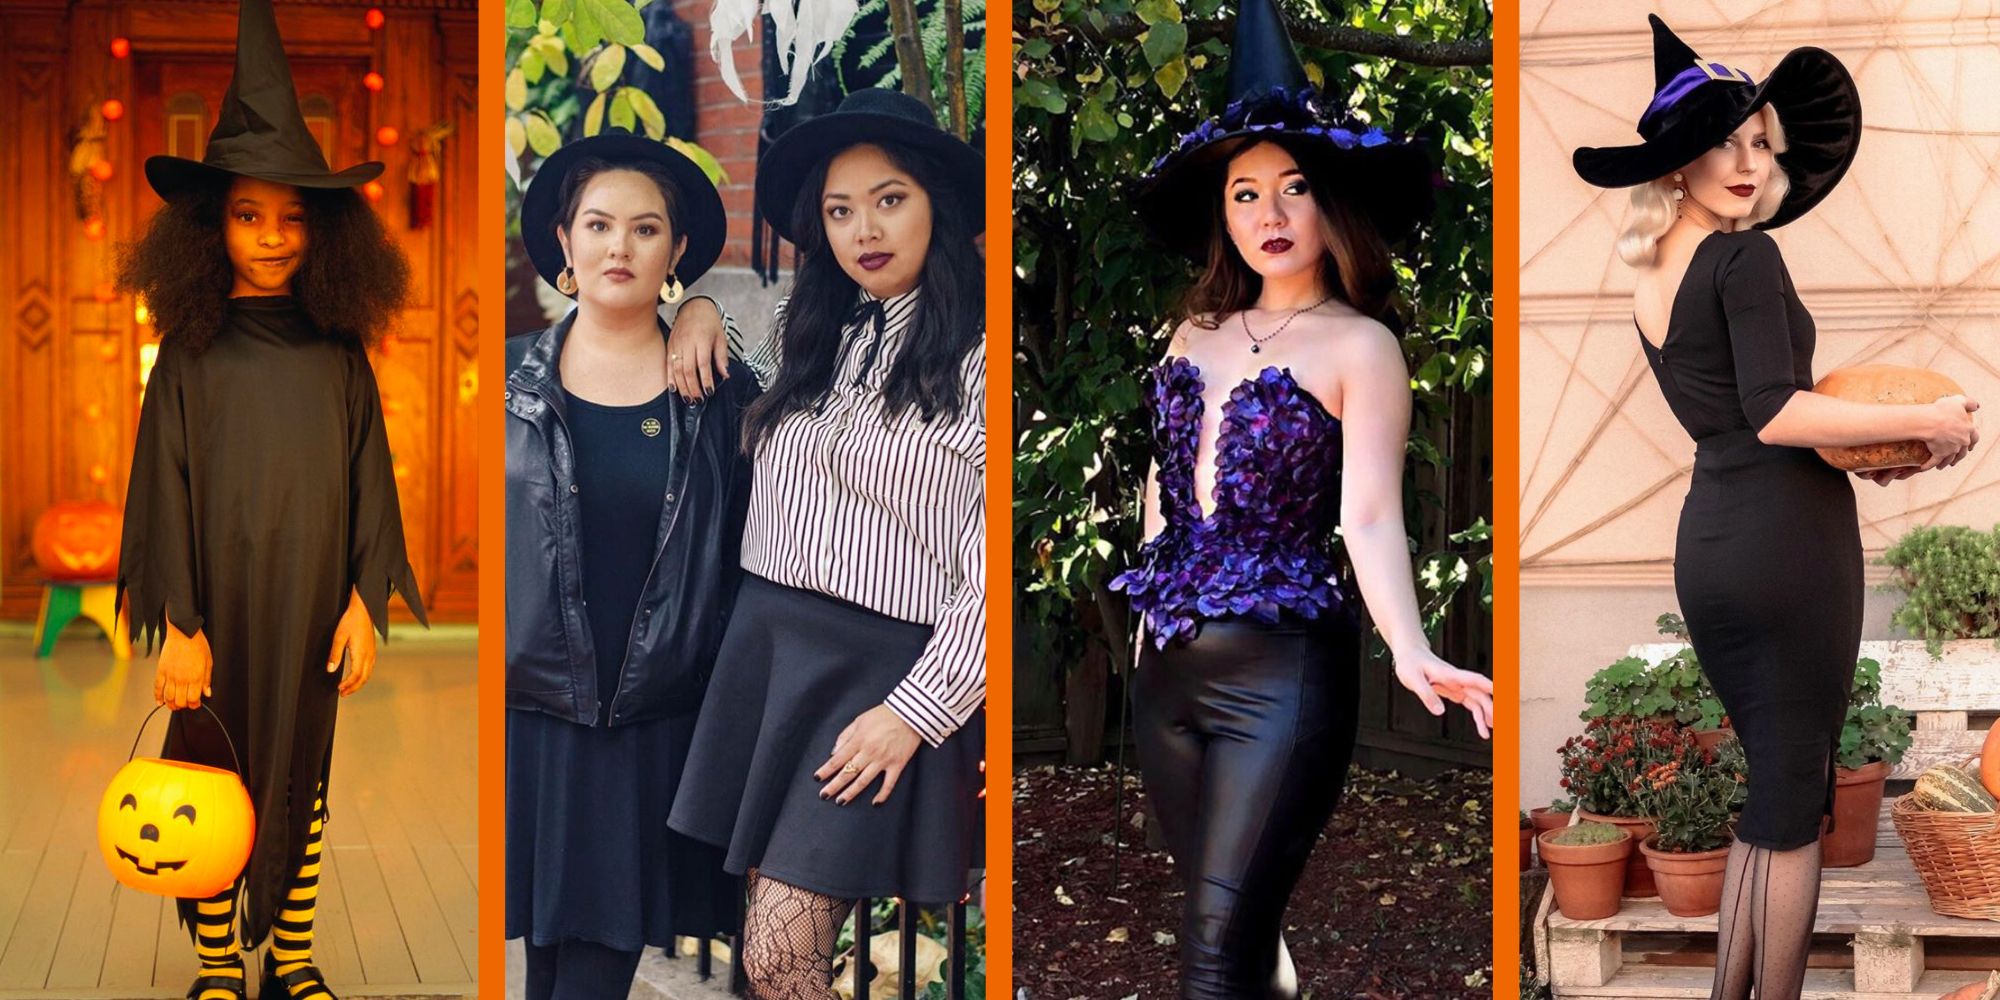 Easy DIY Costumes - Make Your Own Outfit